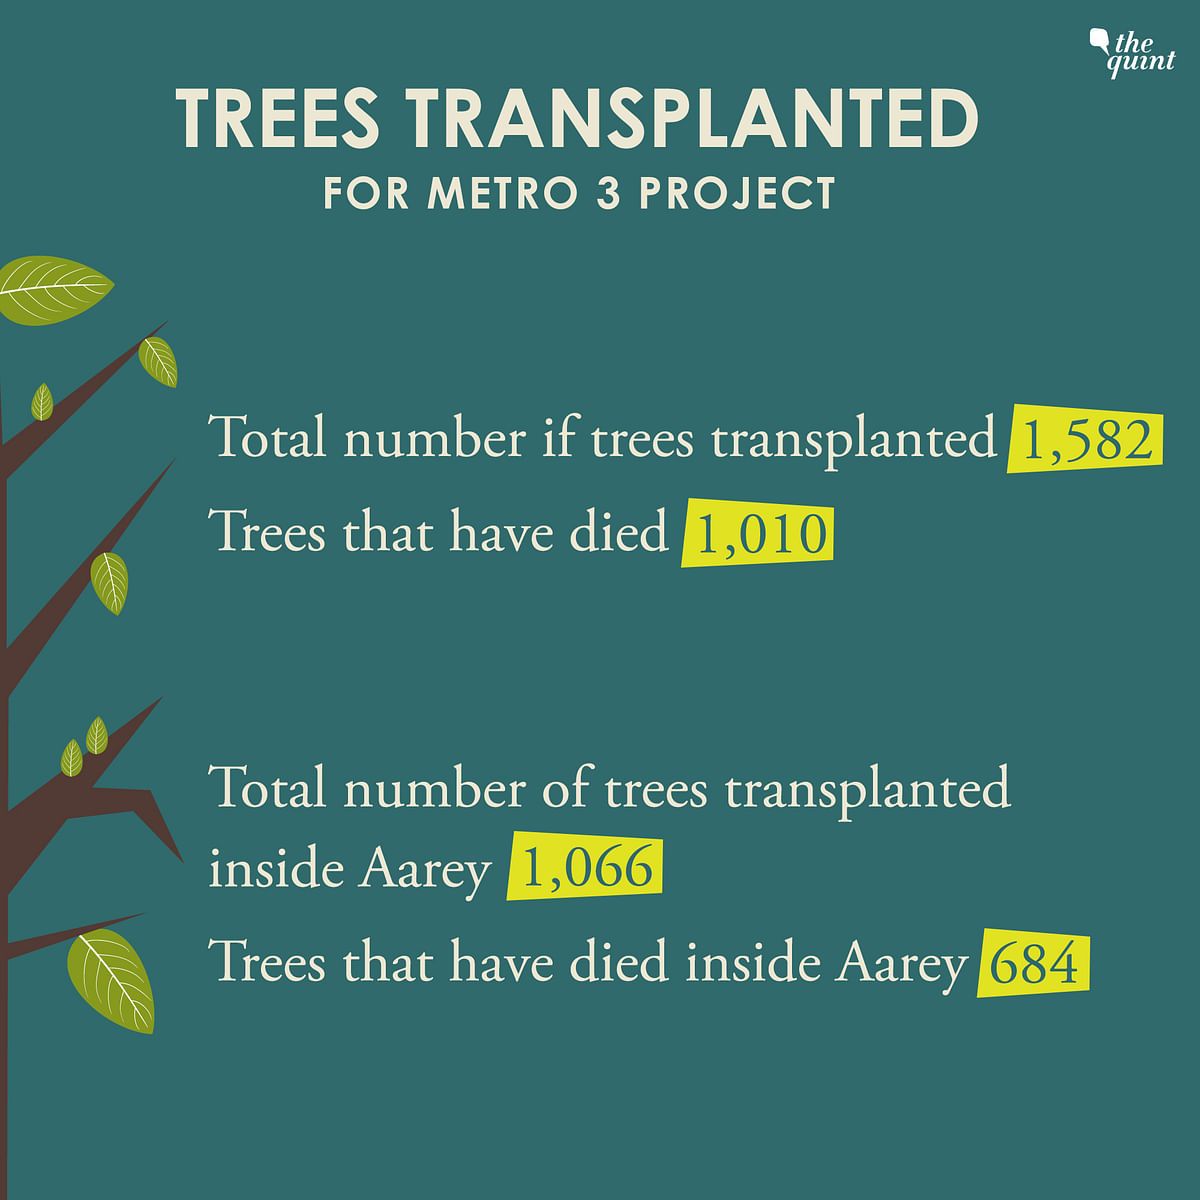 684 of the 1,066 transplanted trees inside the Aarey Milk Colony, for the Metro 3 project, have already died.